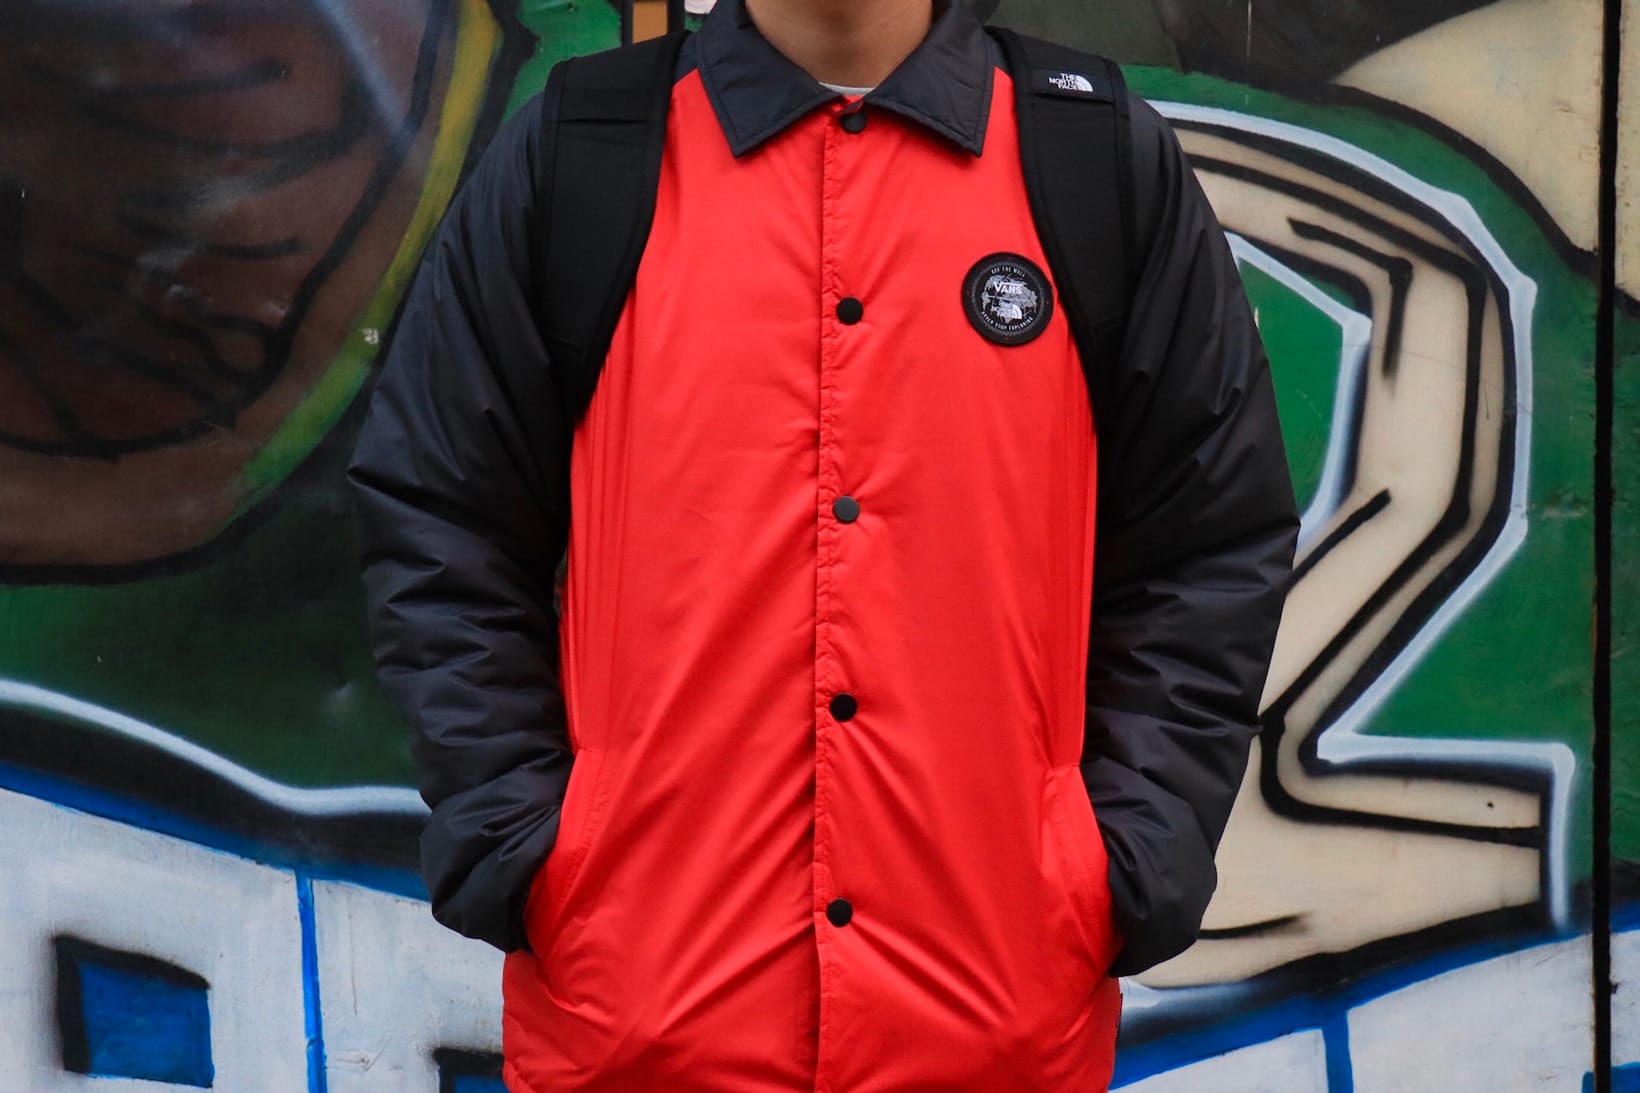 vans x the north face jacket